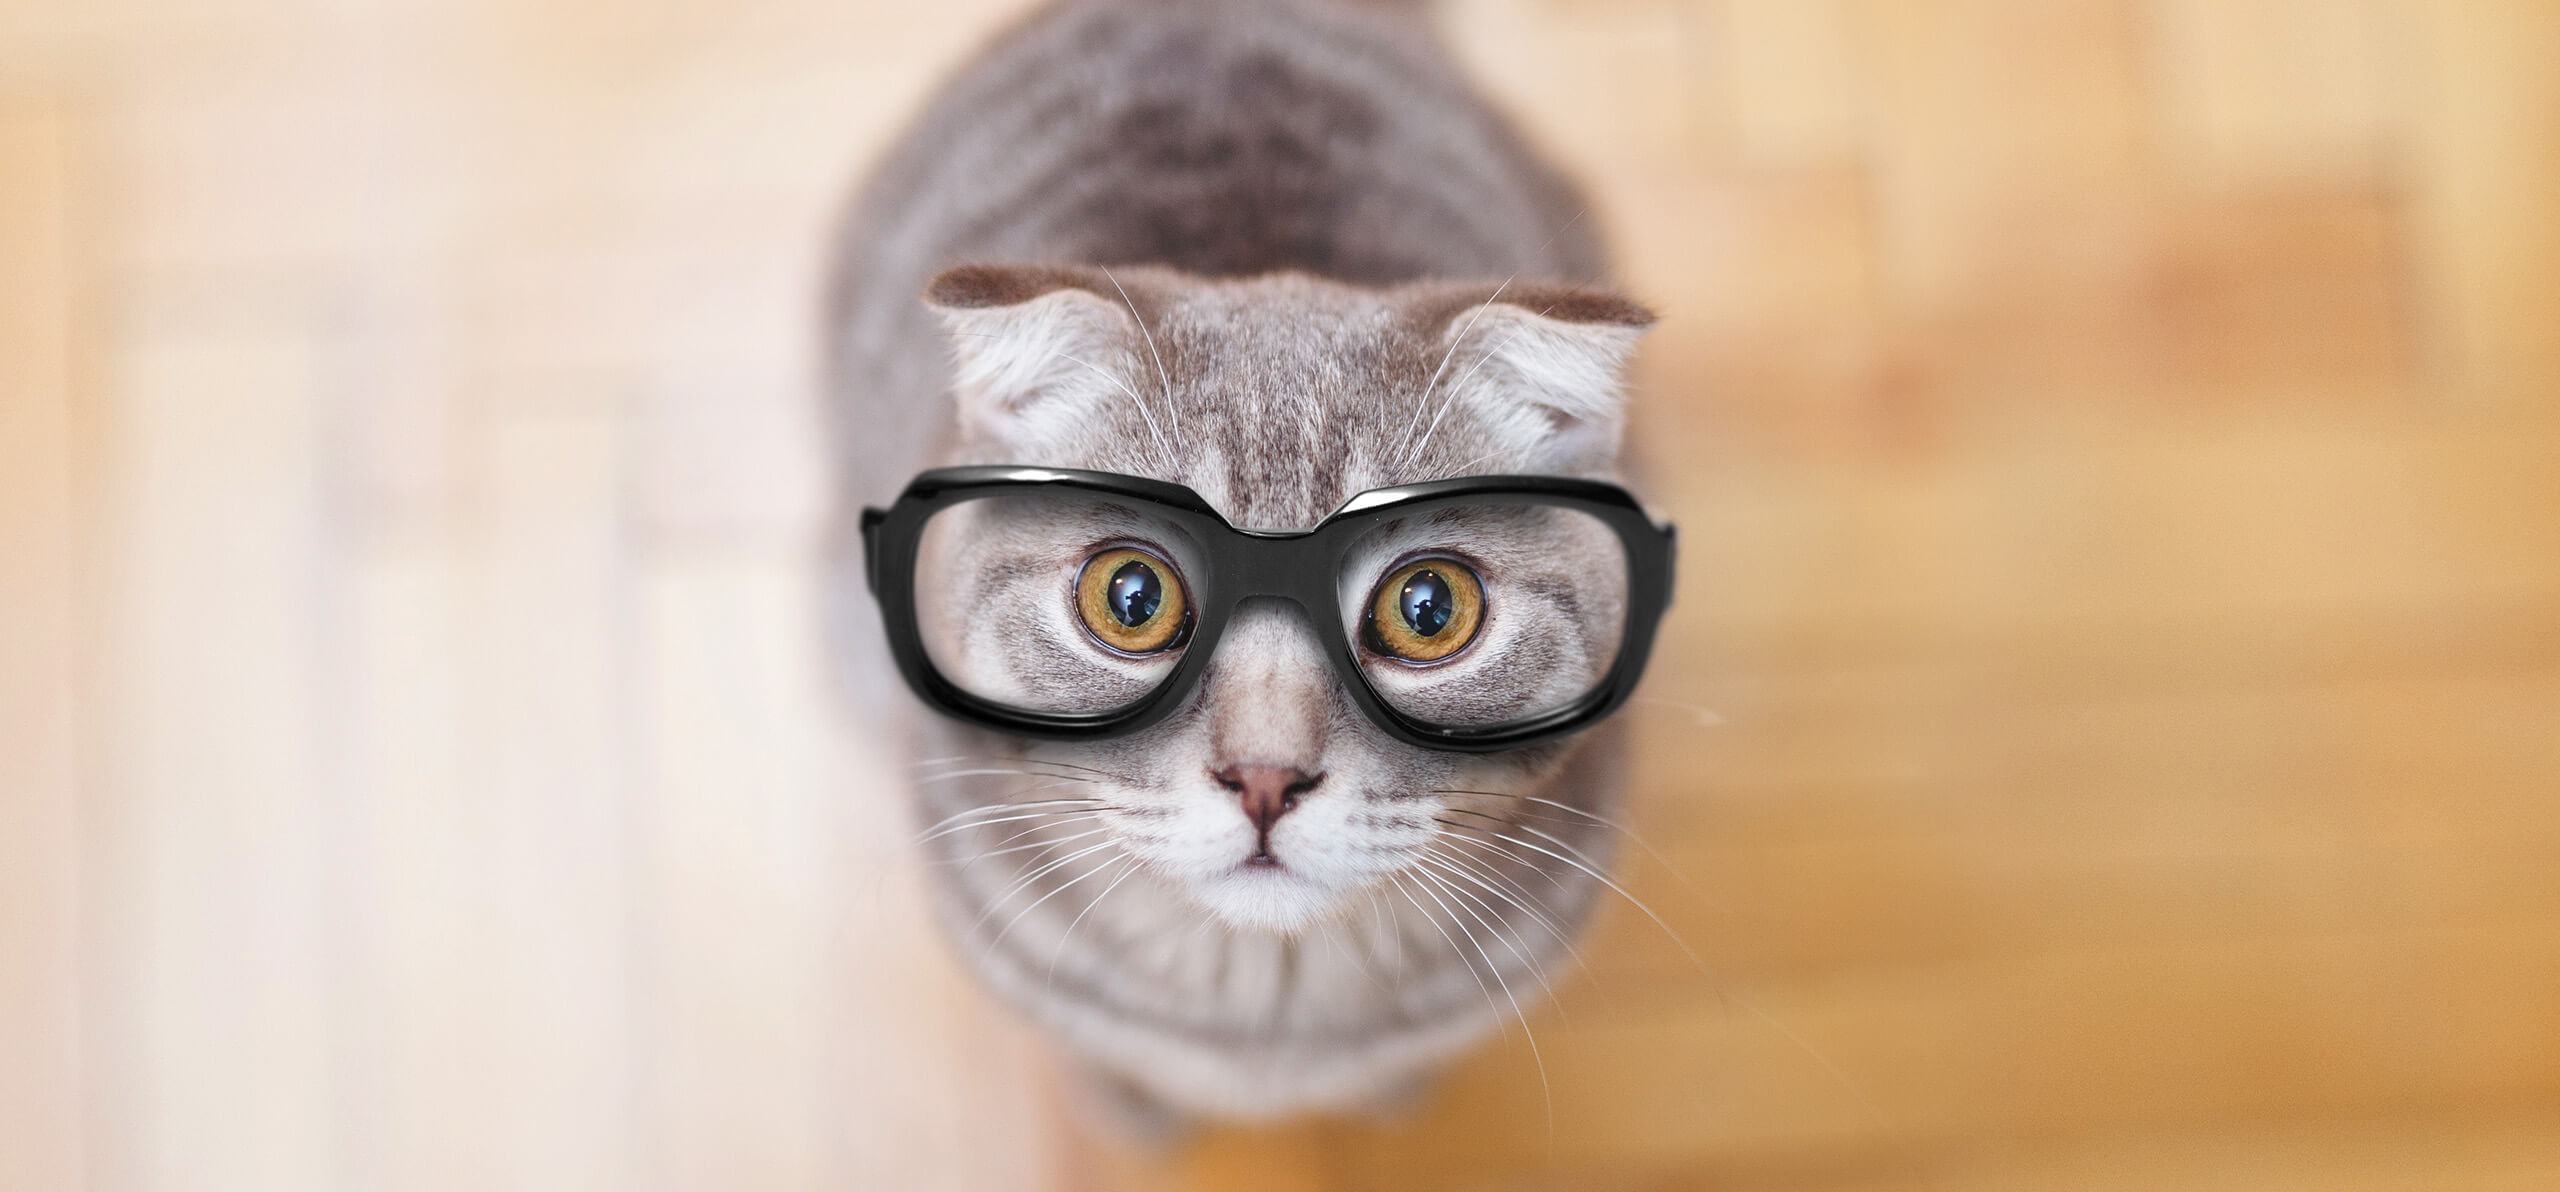 cat with large black glasses looking upward